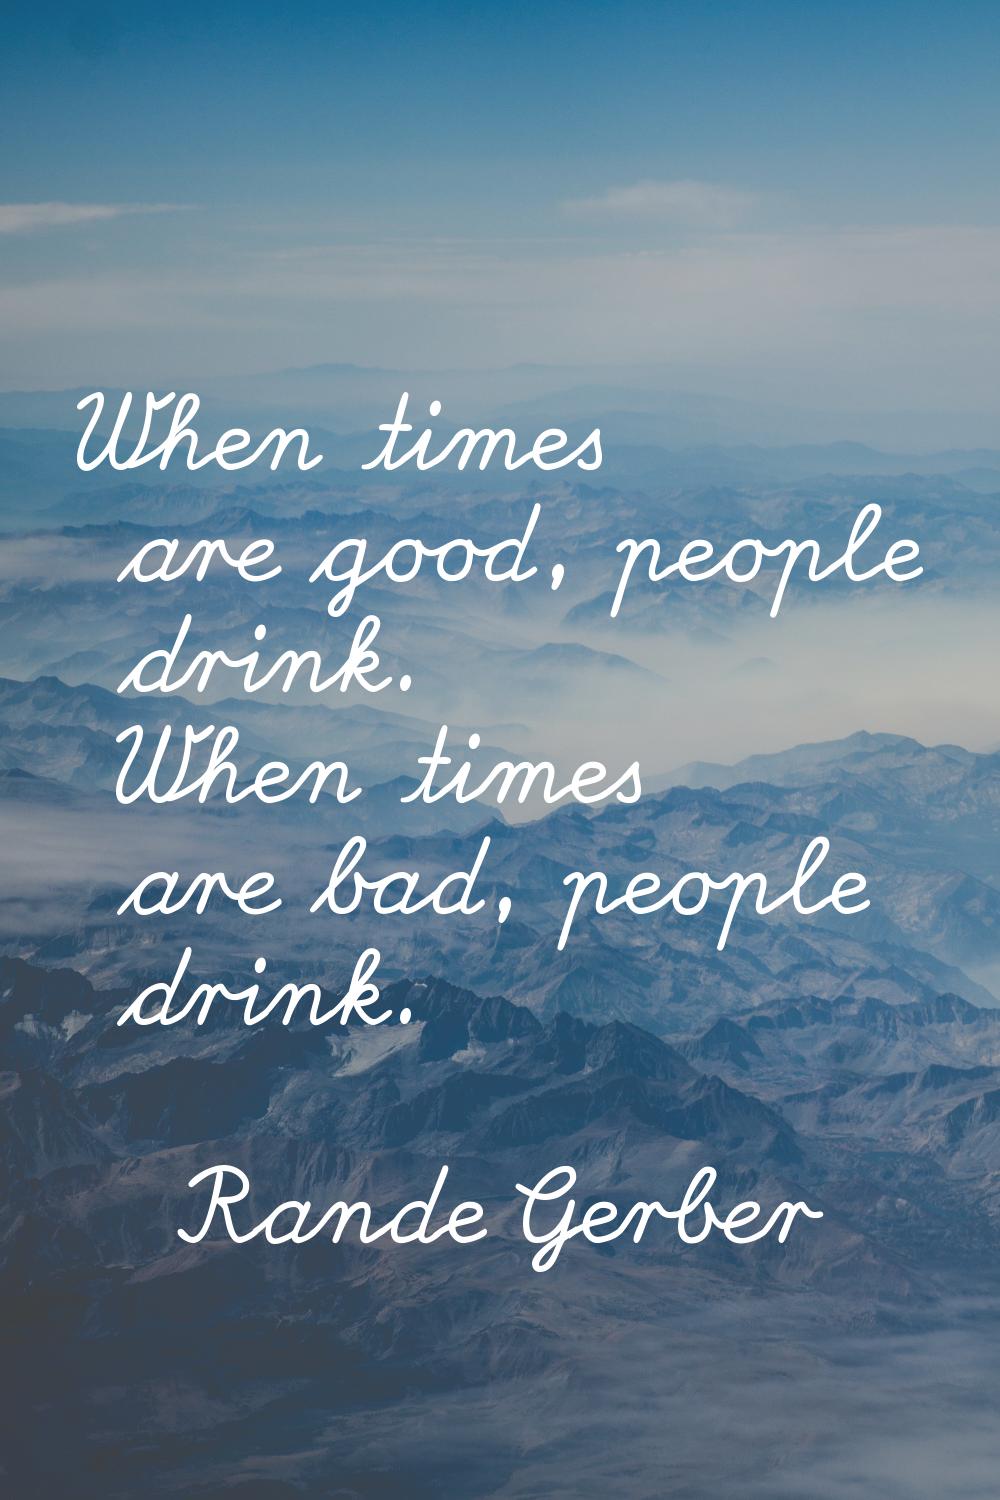 When times are good, people drink. When times are bad, people drink.